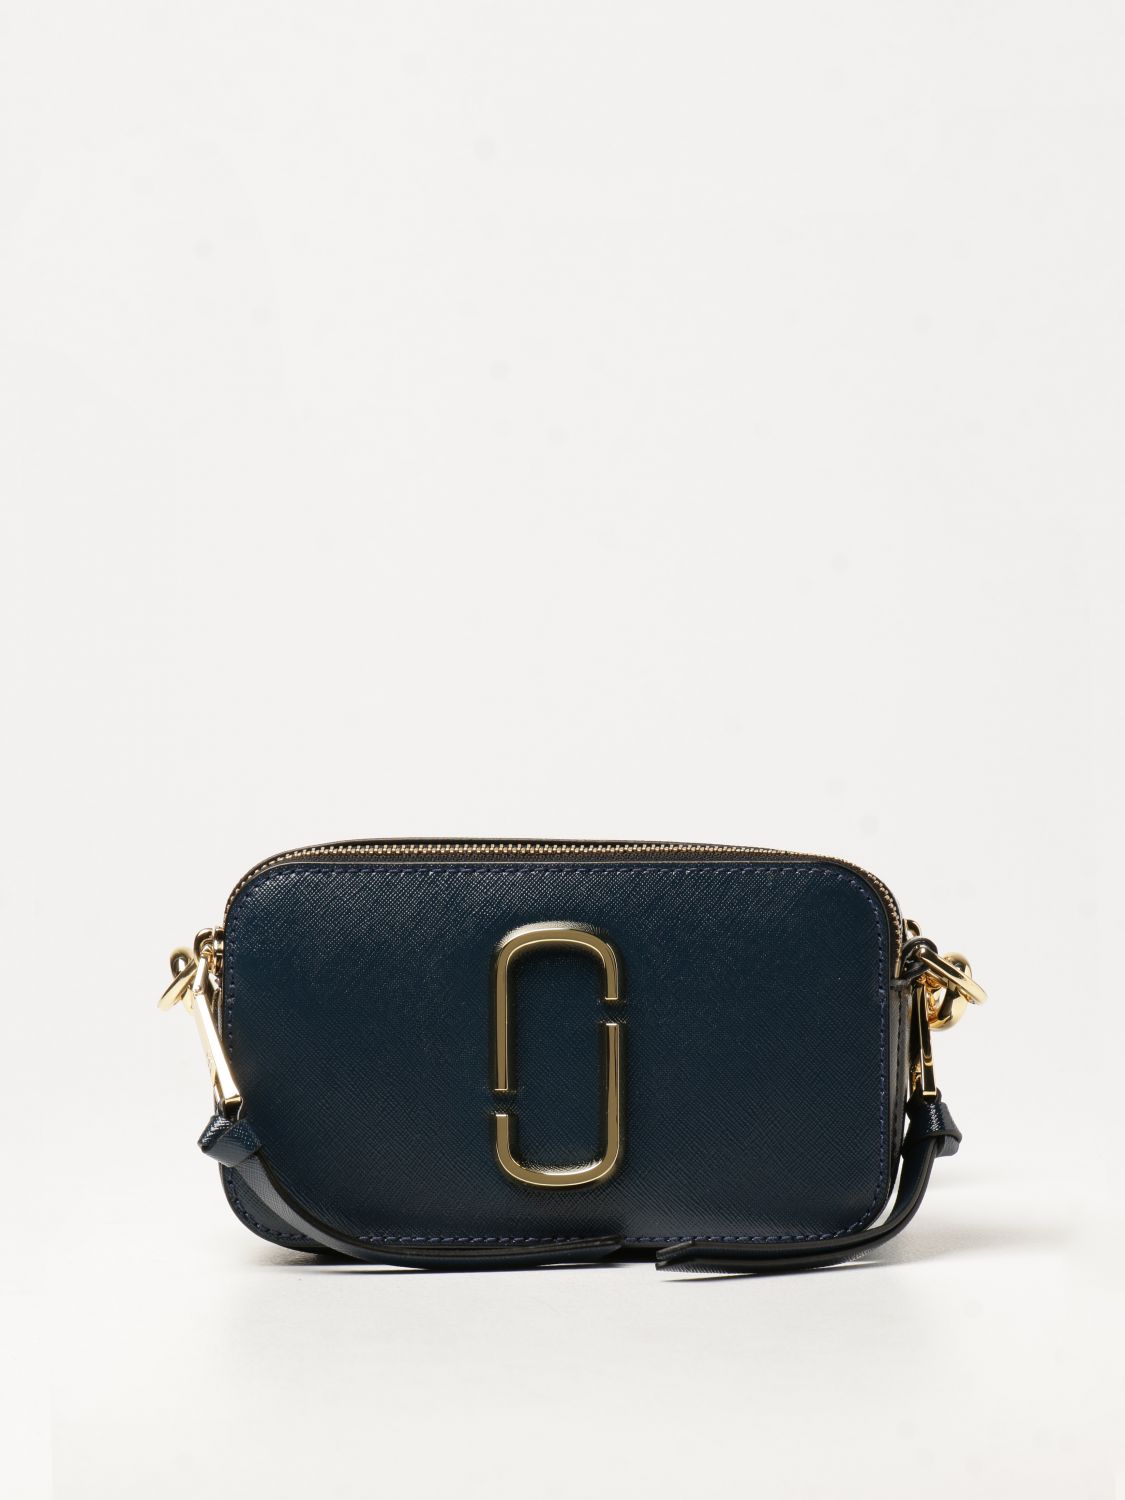 MARC JACOBS: The Logo Strap Snapshot bag in saffiano leather